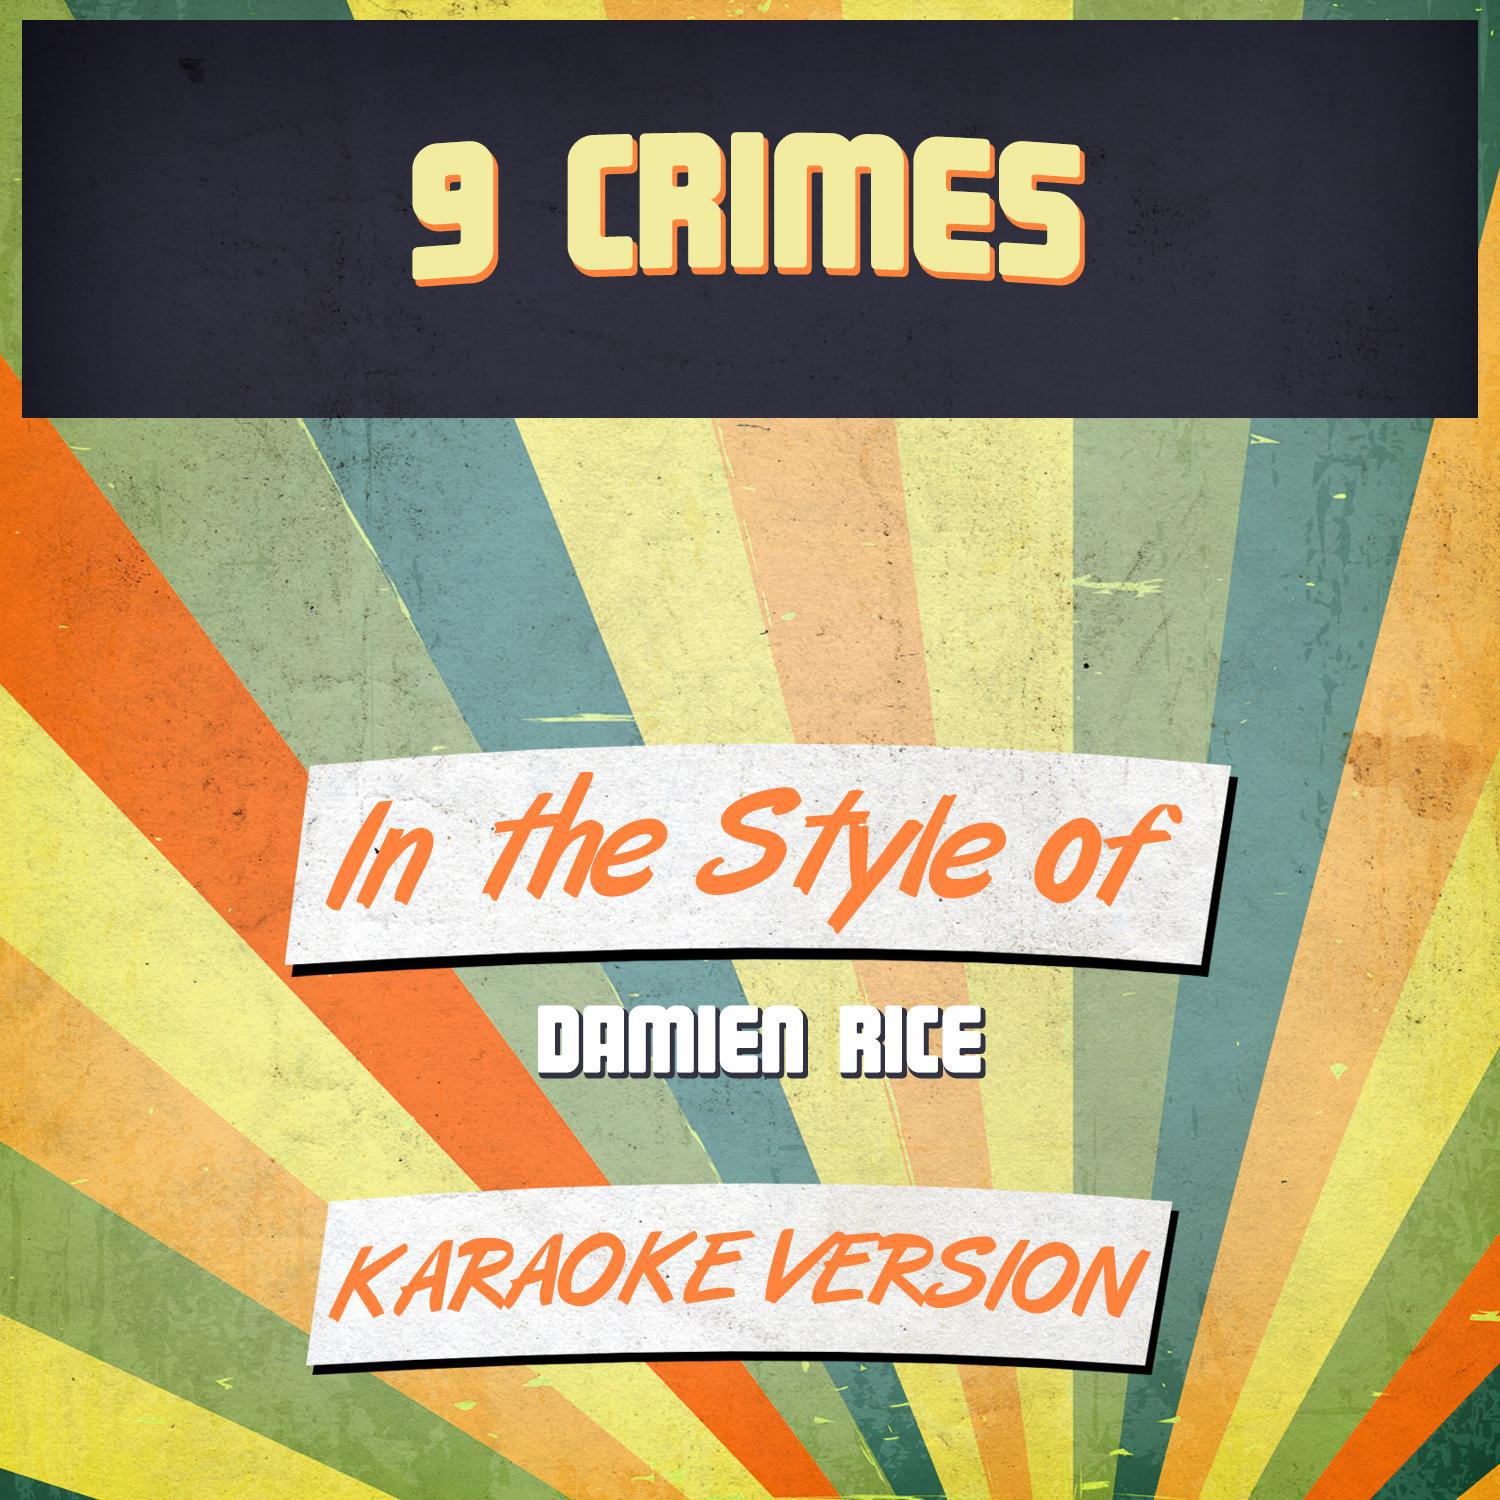 9 Crimes (In the Style of Damien Rice) [Karaoke Version]